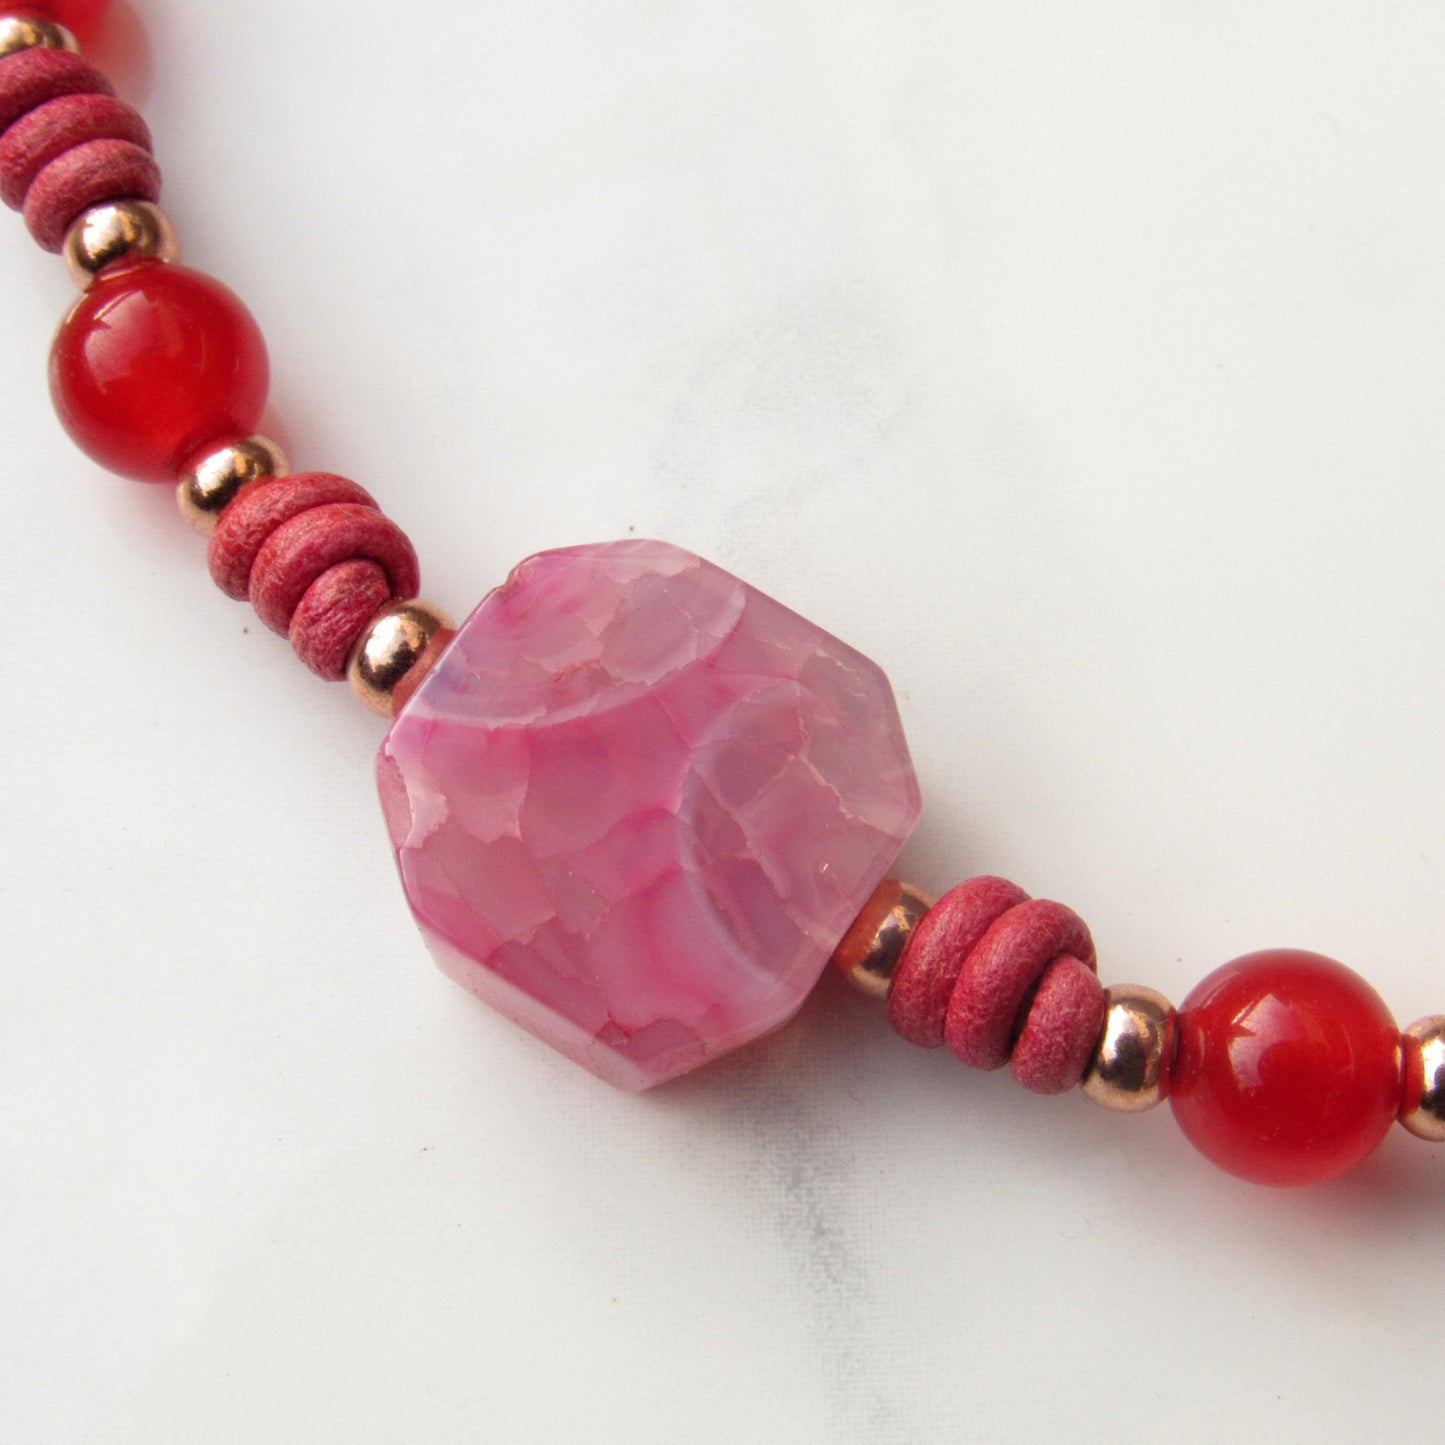 Agate gemstone, Red Jade, and genuine Leather Necklace